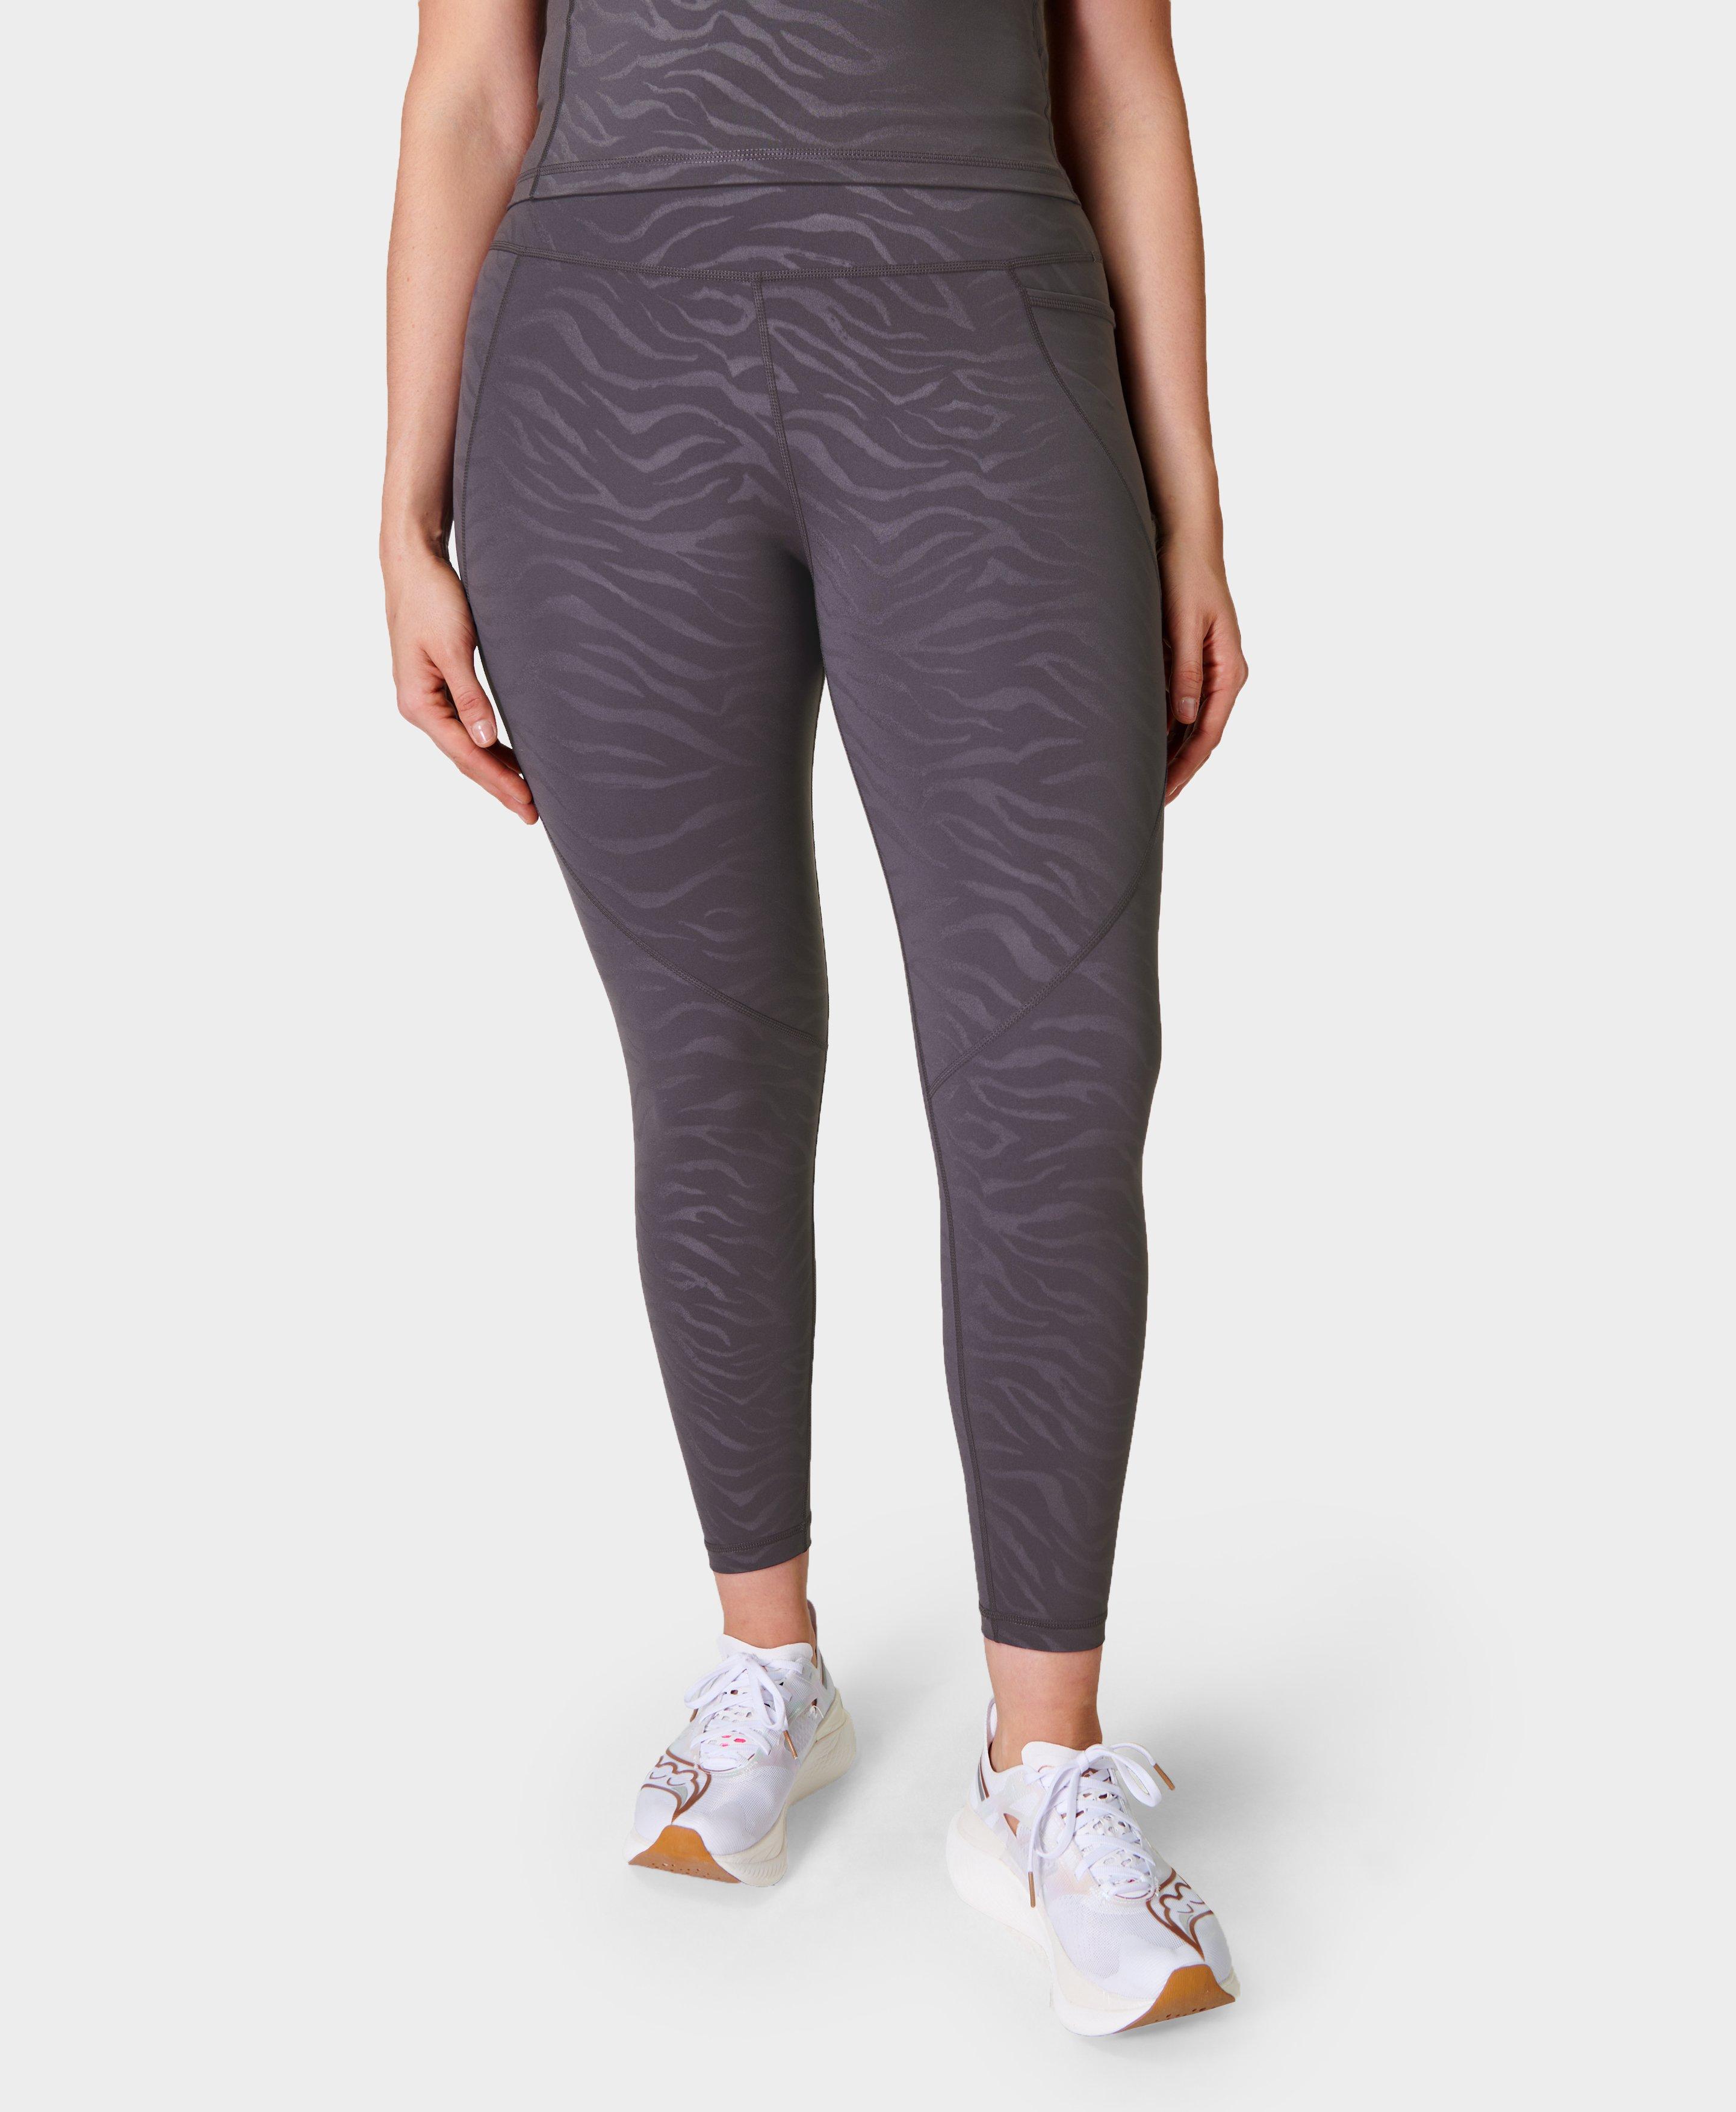 Sweaty Betty Sale Bottoms - Shop Up to 50% Off